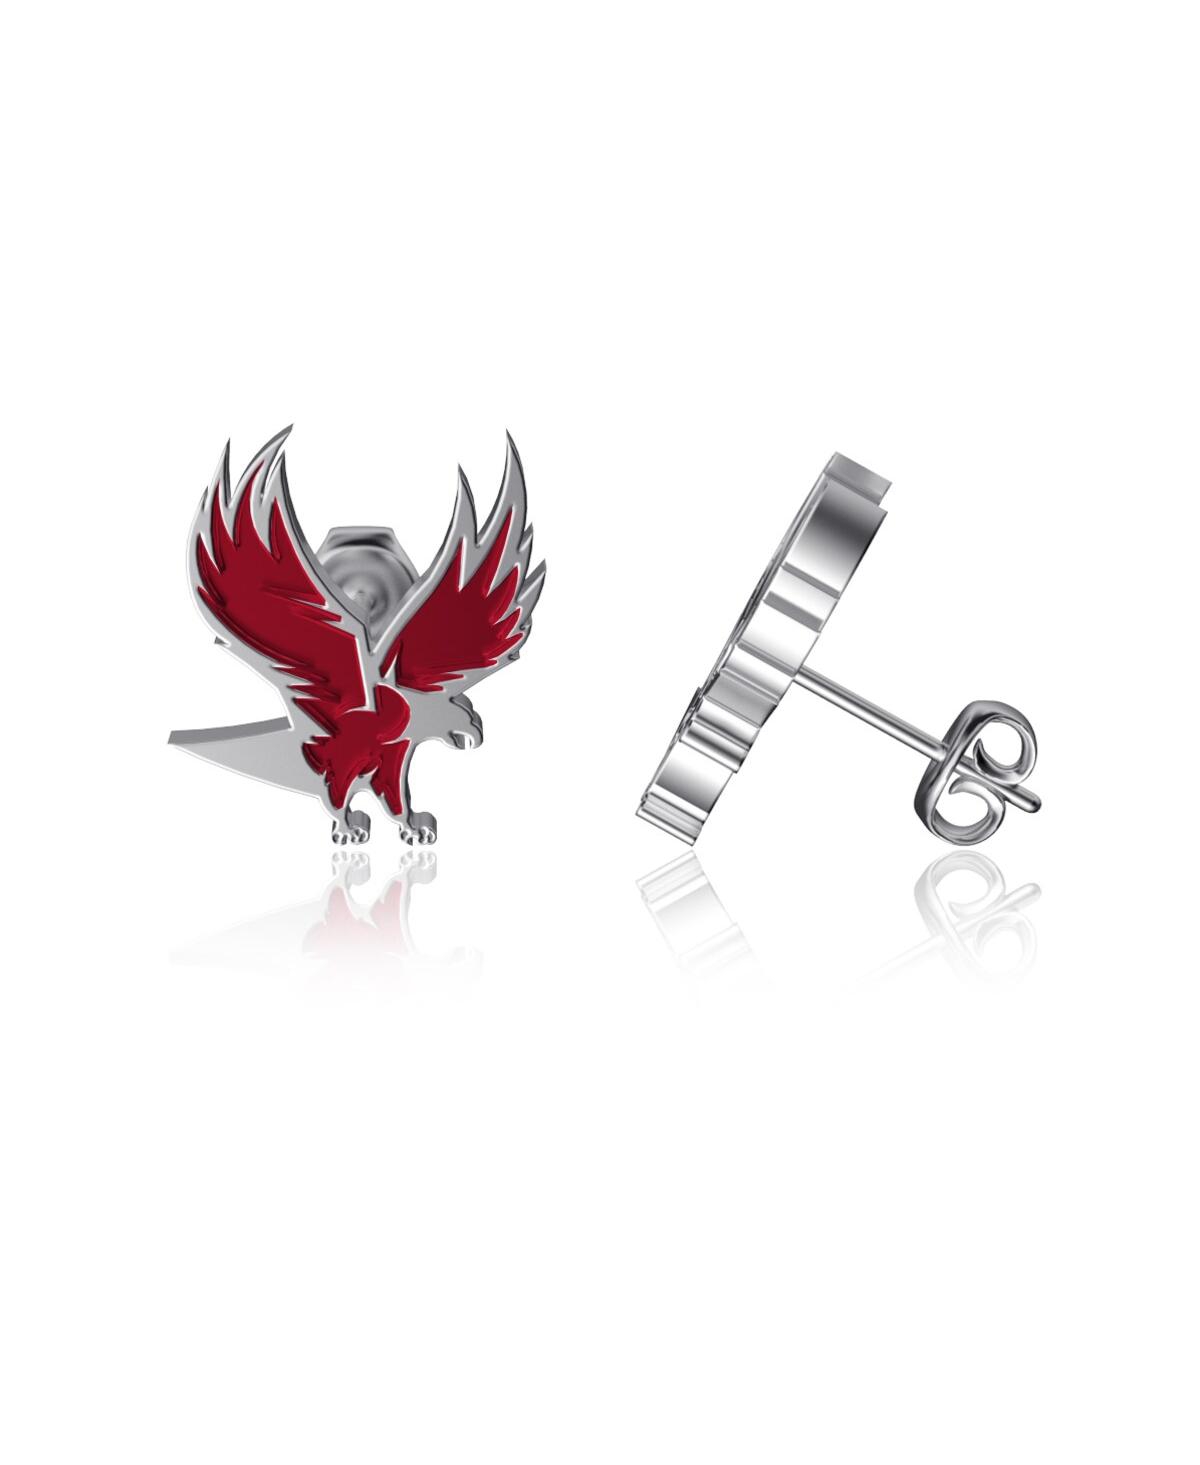 Dayna Designs Women's  North Carolina Central Eagles Enamel Post Earrings In Red,silver